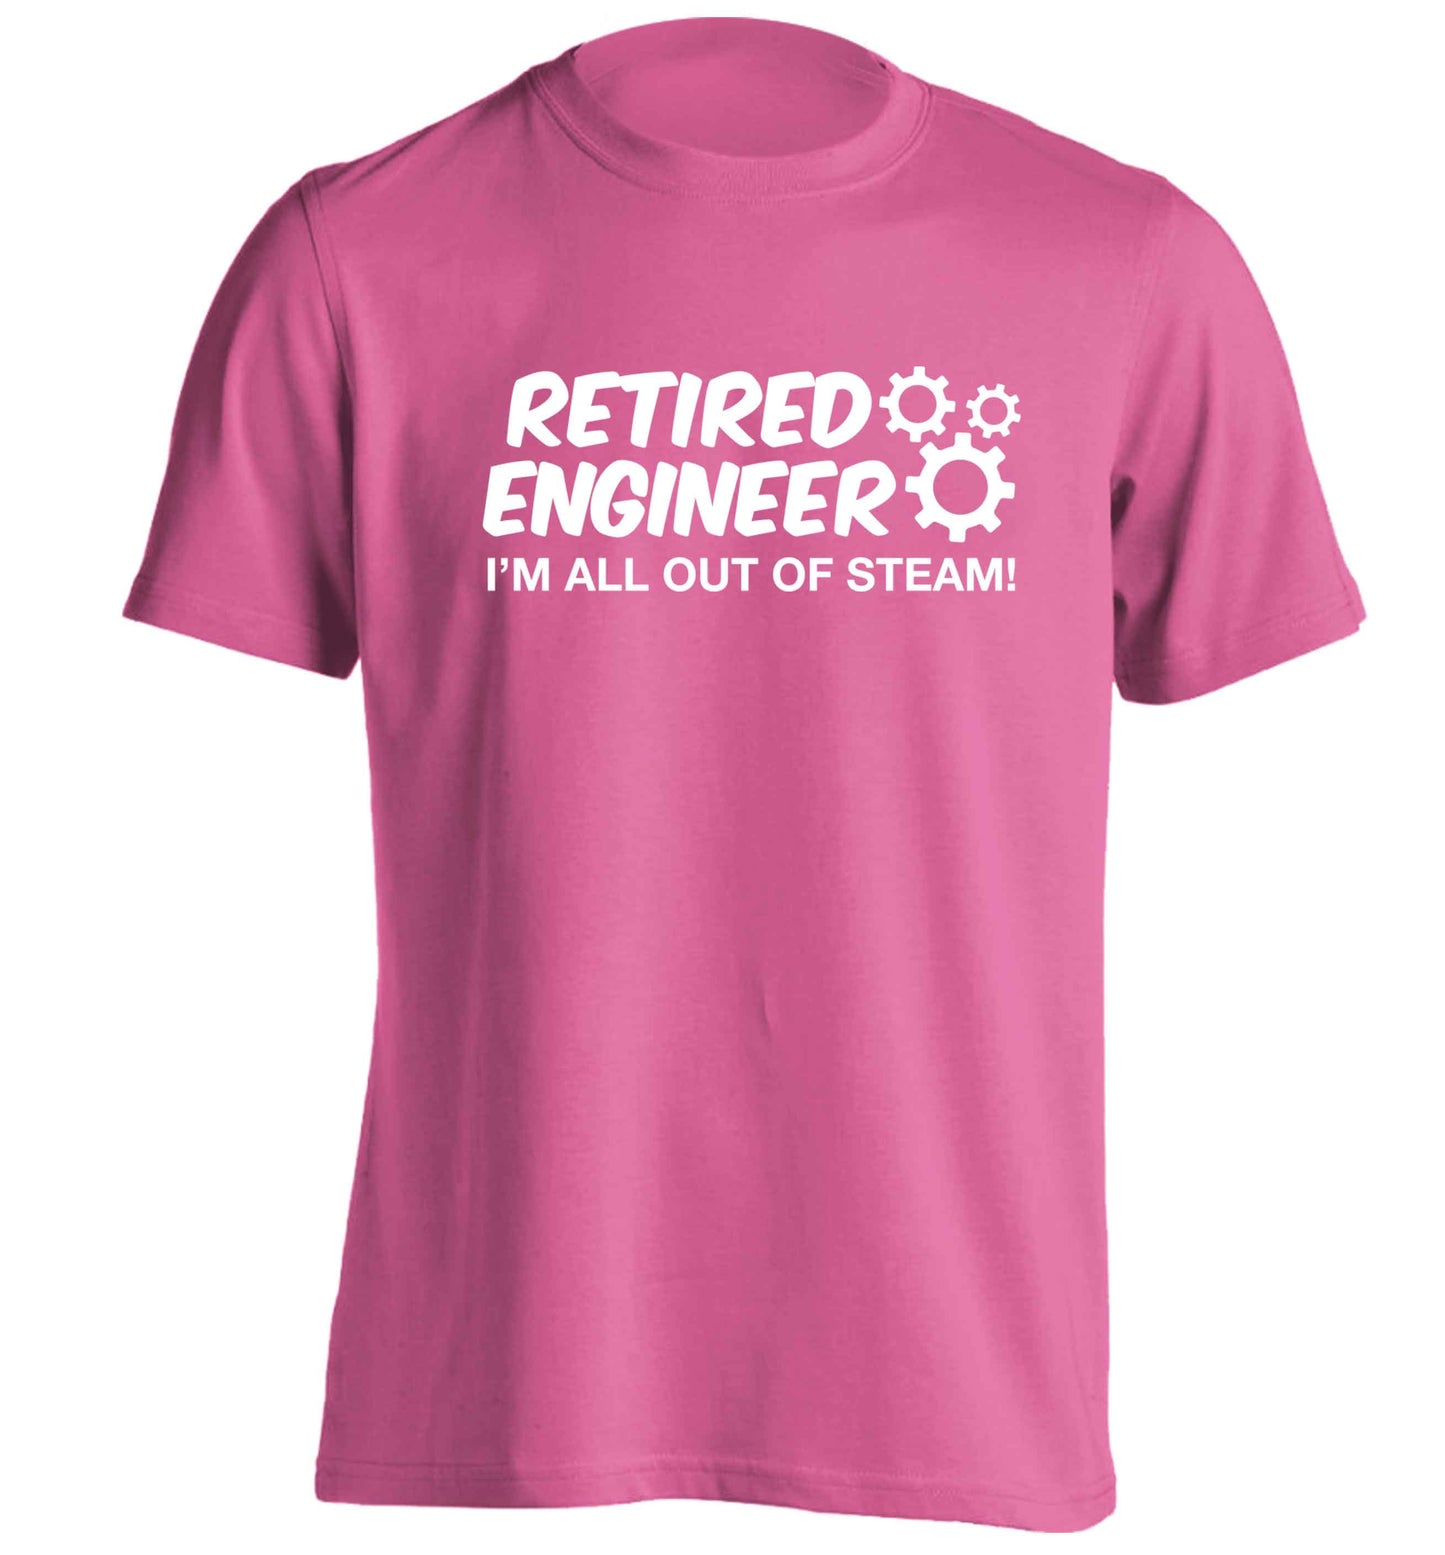 Retired engineer I'm all out of steam adults unisex pink Tshirt 2XL